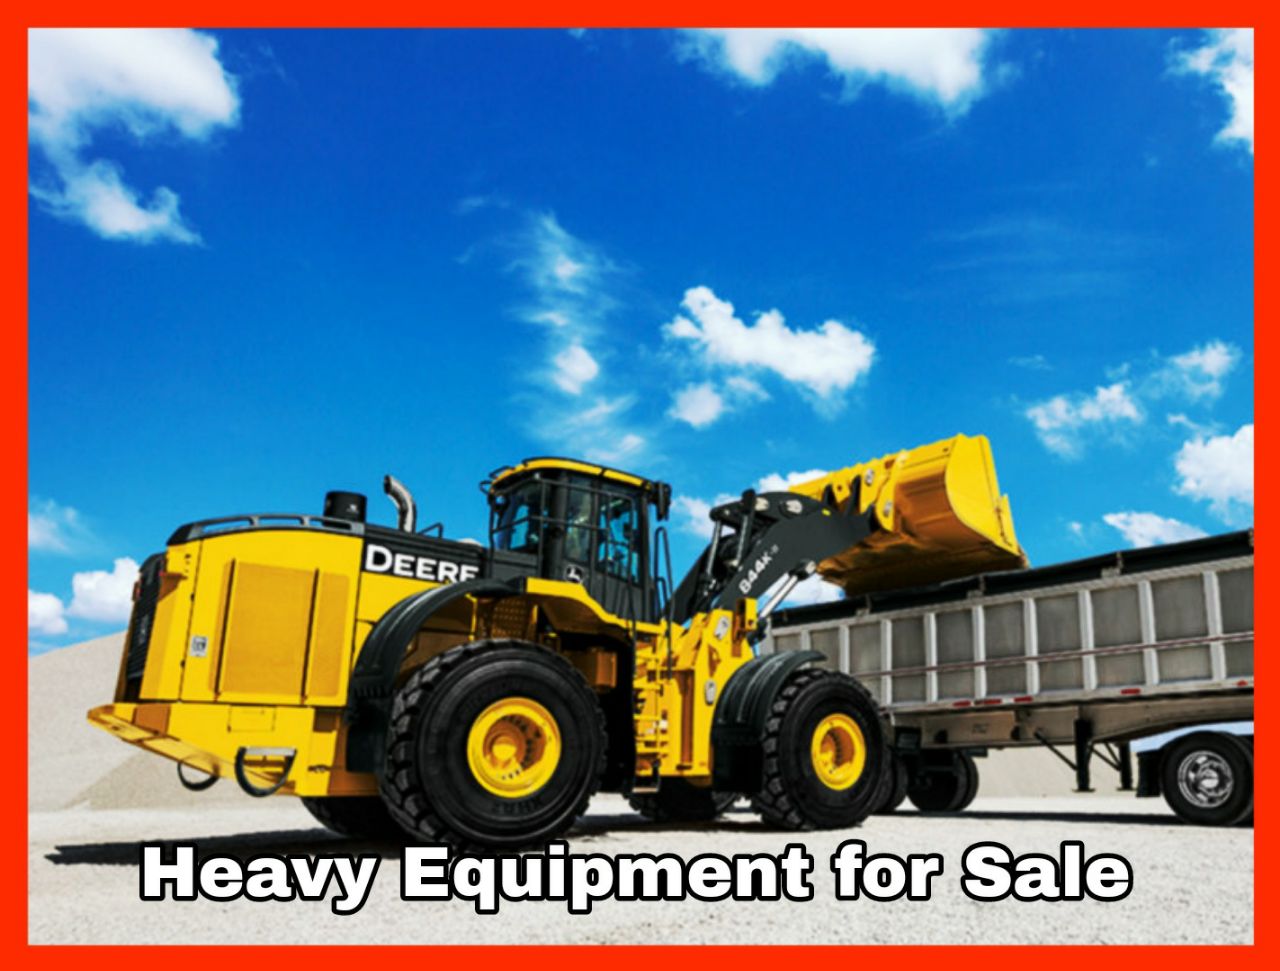 Heavy Equipment for Sale